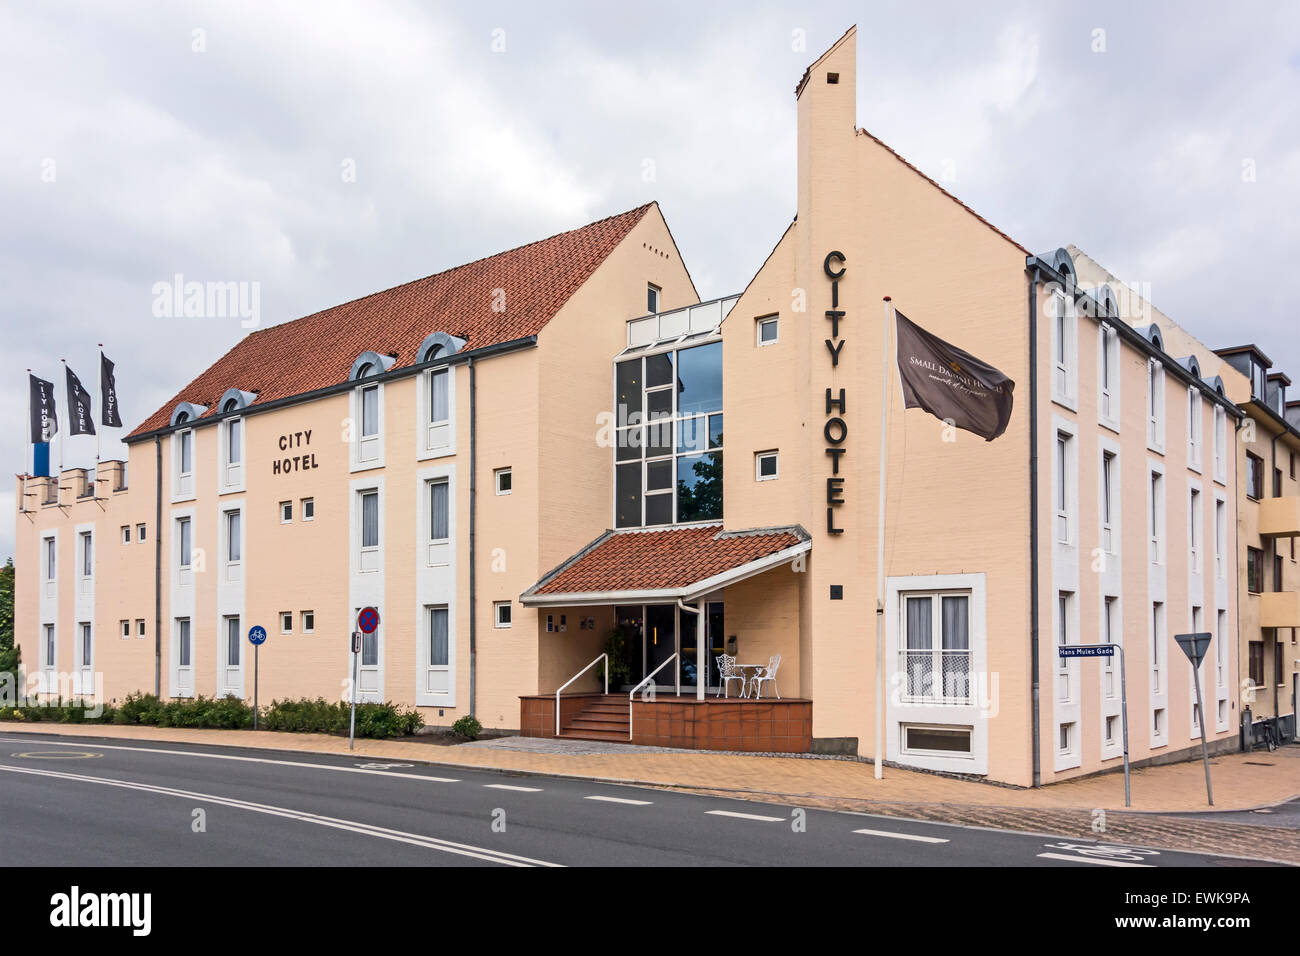 City Hotel In Hans Mules Gade Odense Denmark Stock Photo Alamy